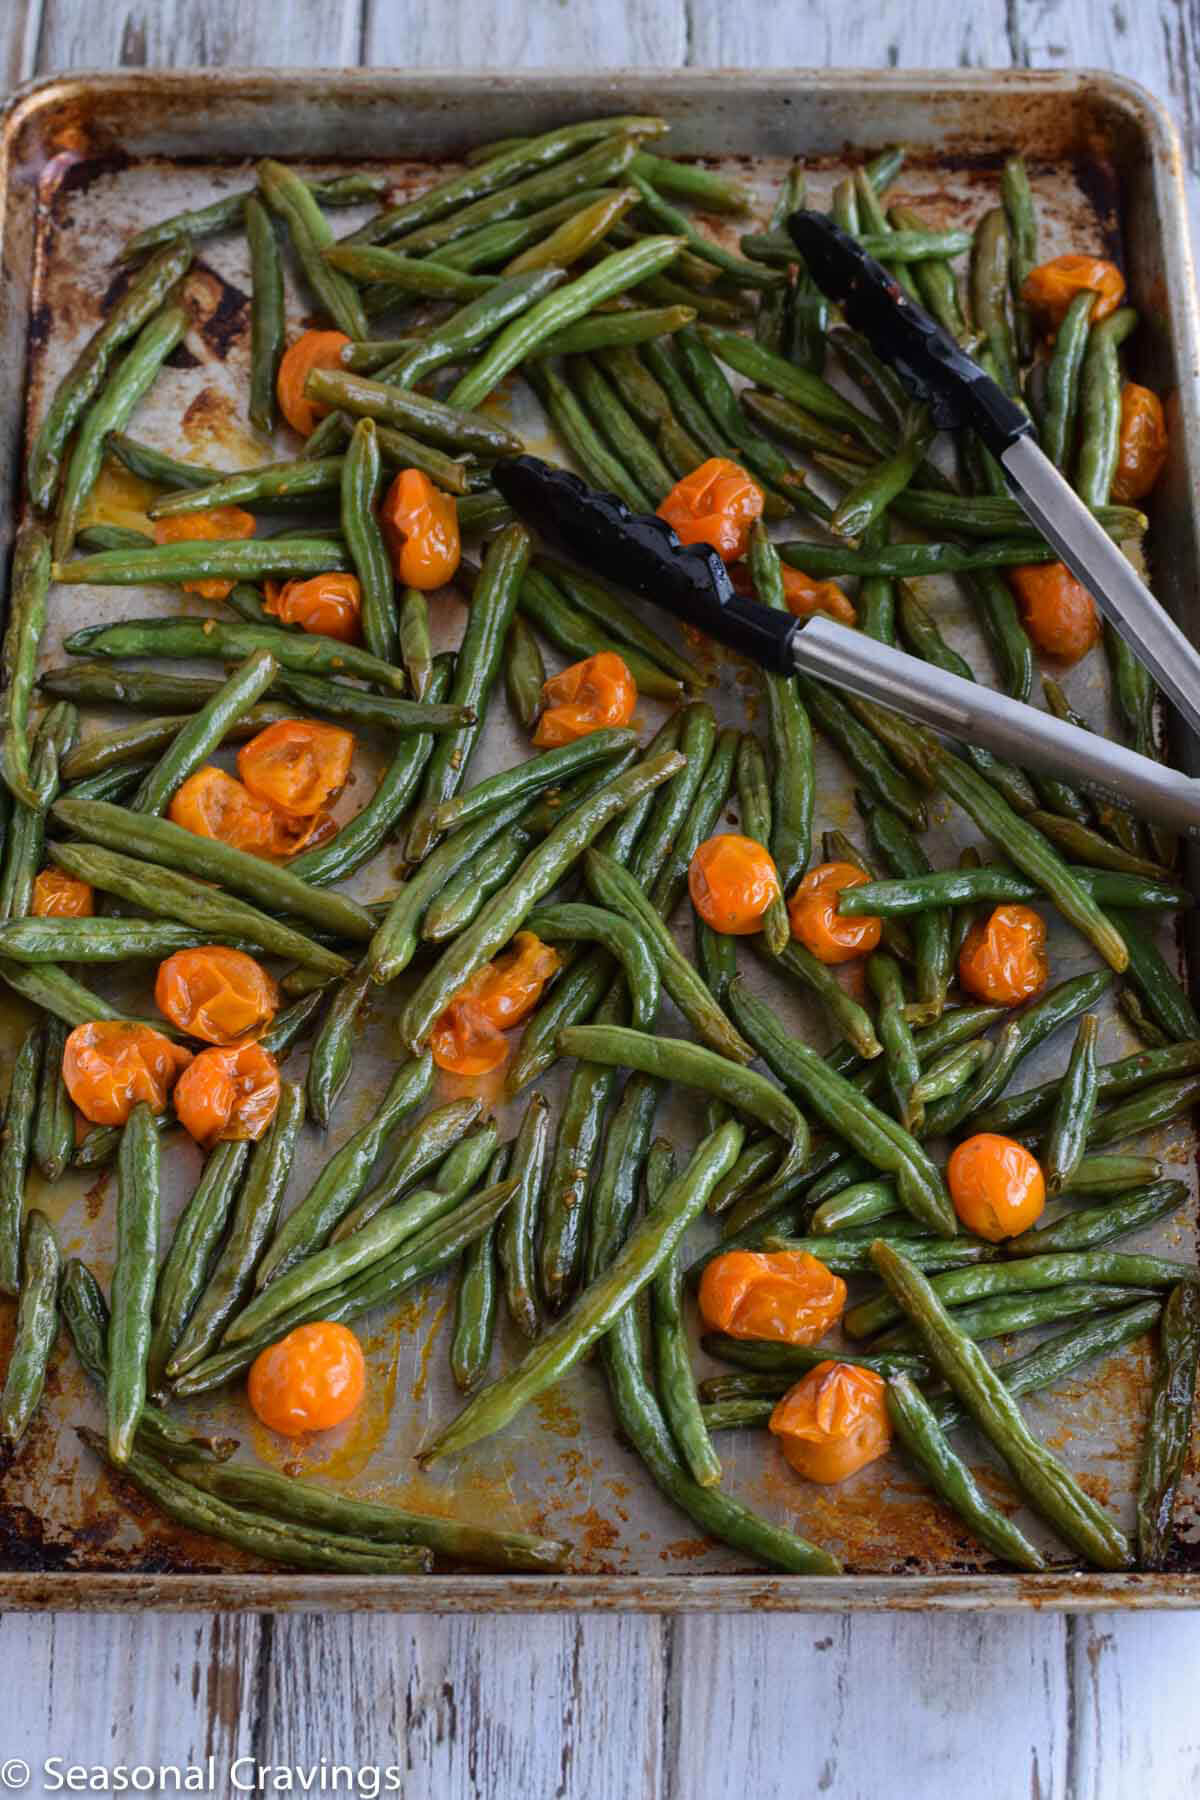 Oven Roasted Green Beans with Tomatoes